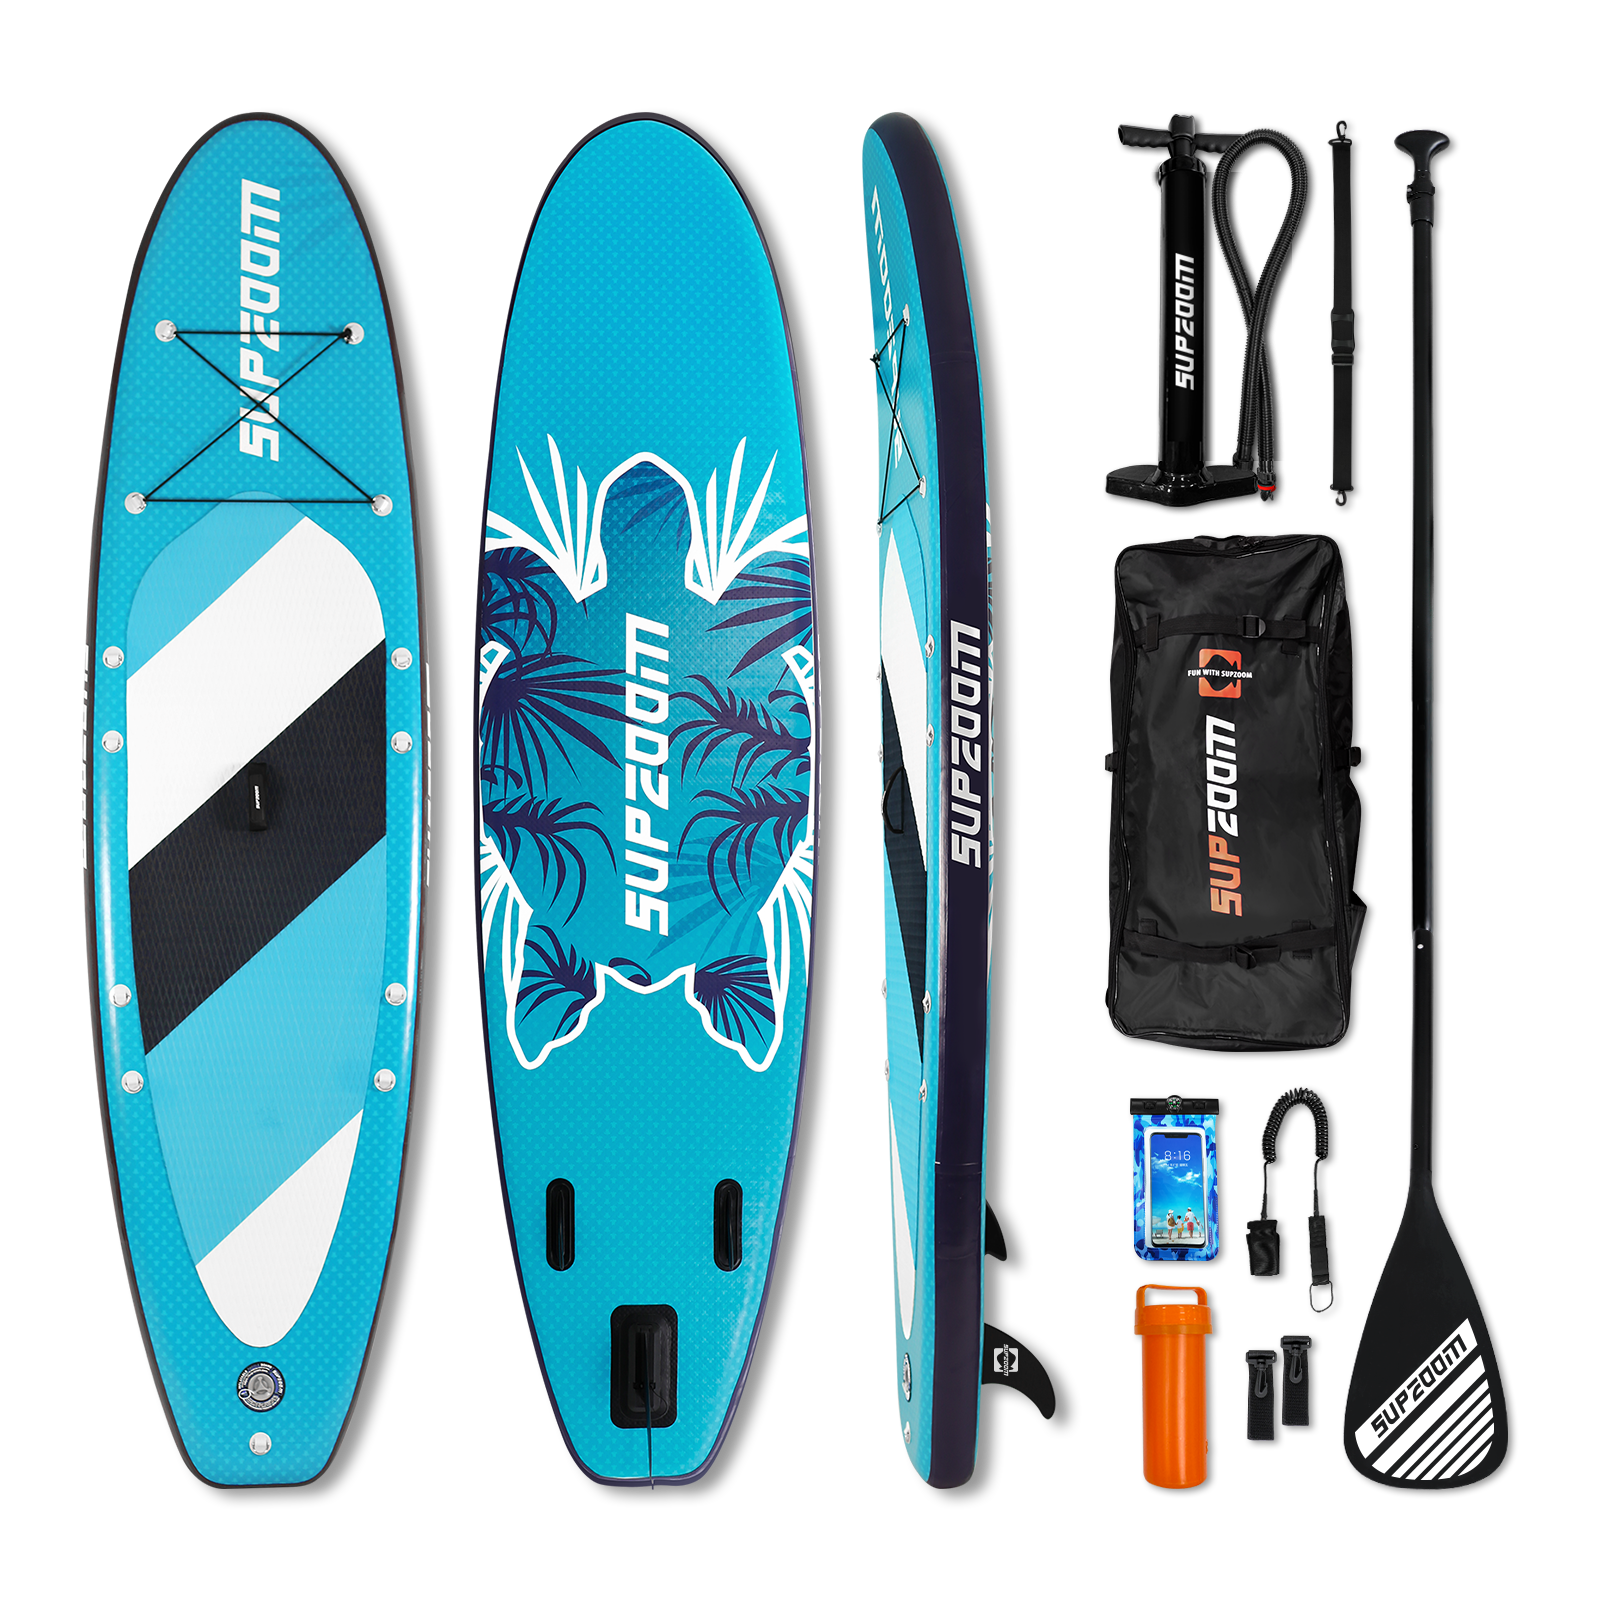 Long turtle all round 10'6" inflatable stand up paddle board | Supzoom